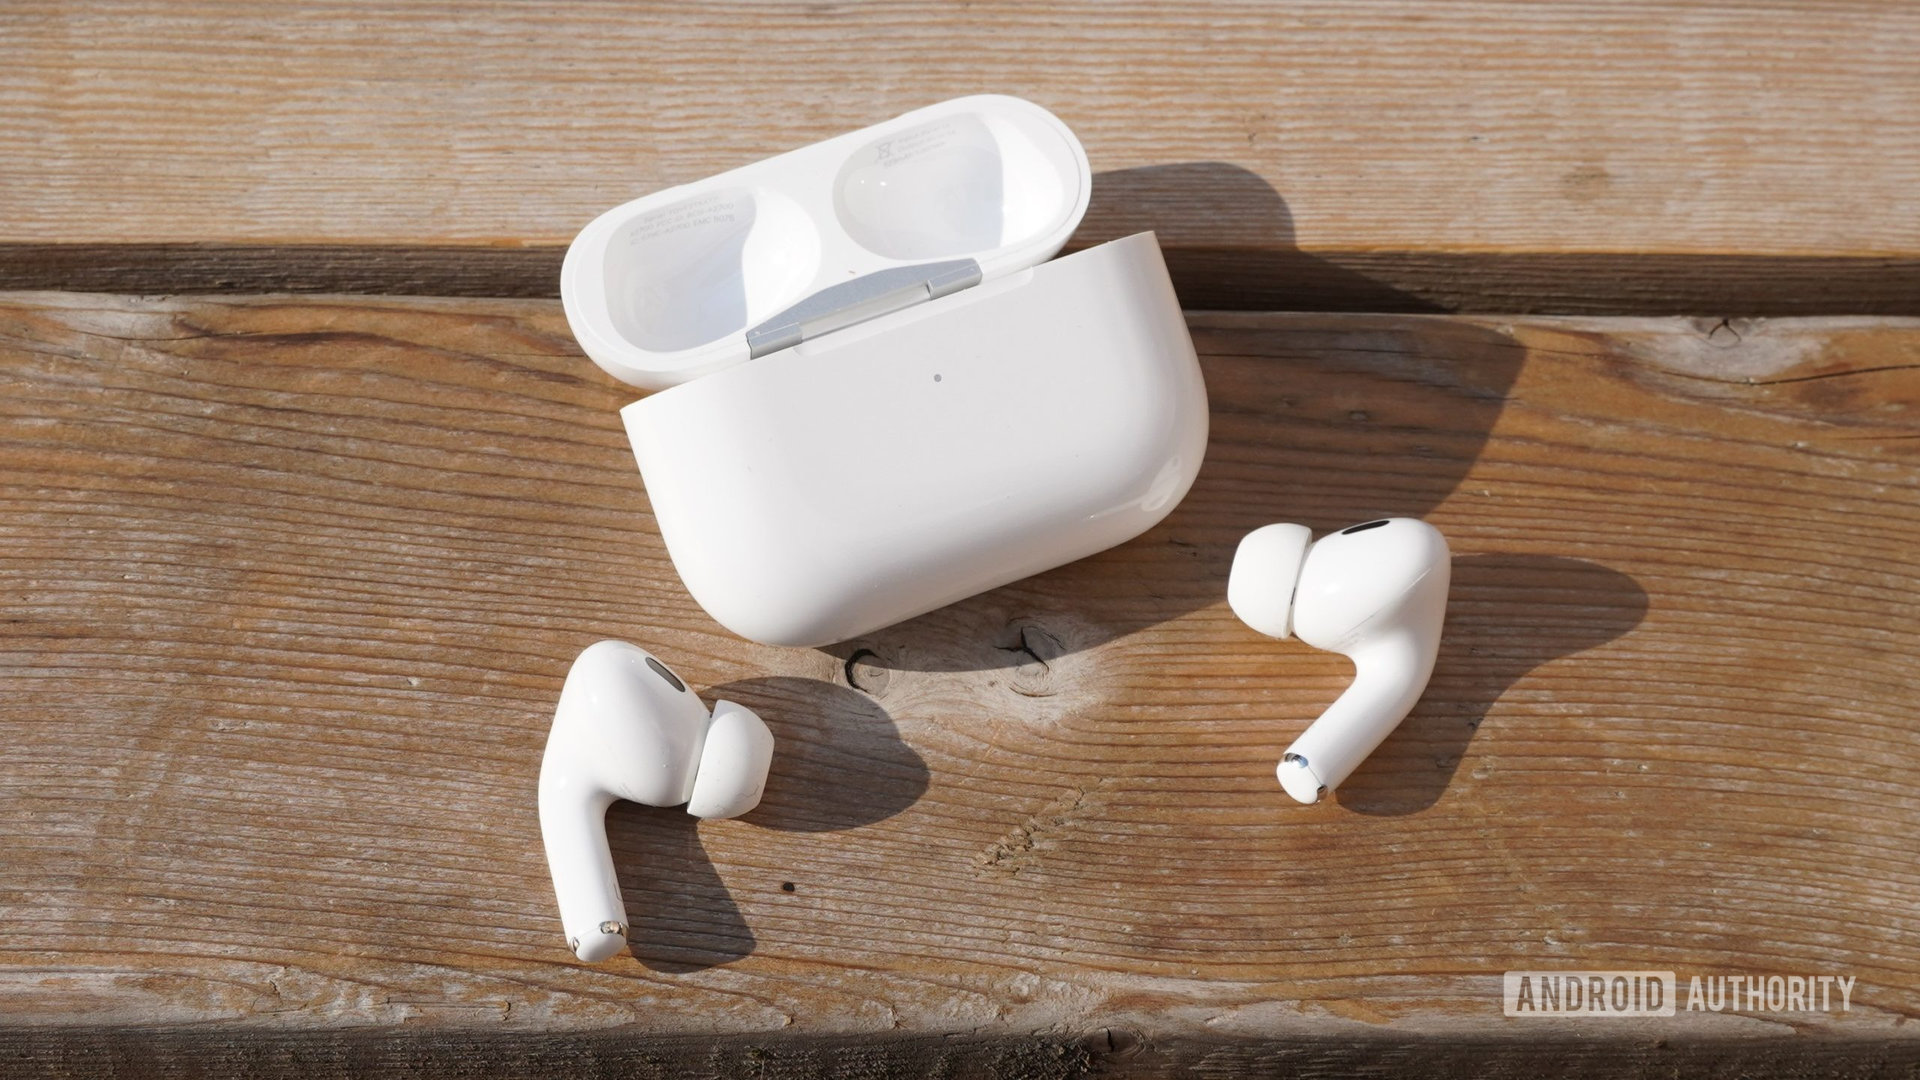 The AirPods Pro 2 sitting outside their case on a wooden surface with the case nearby.